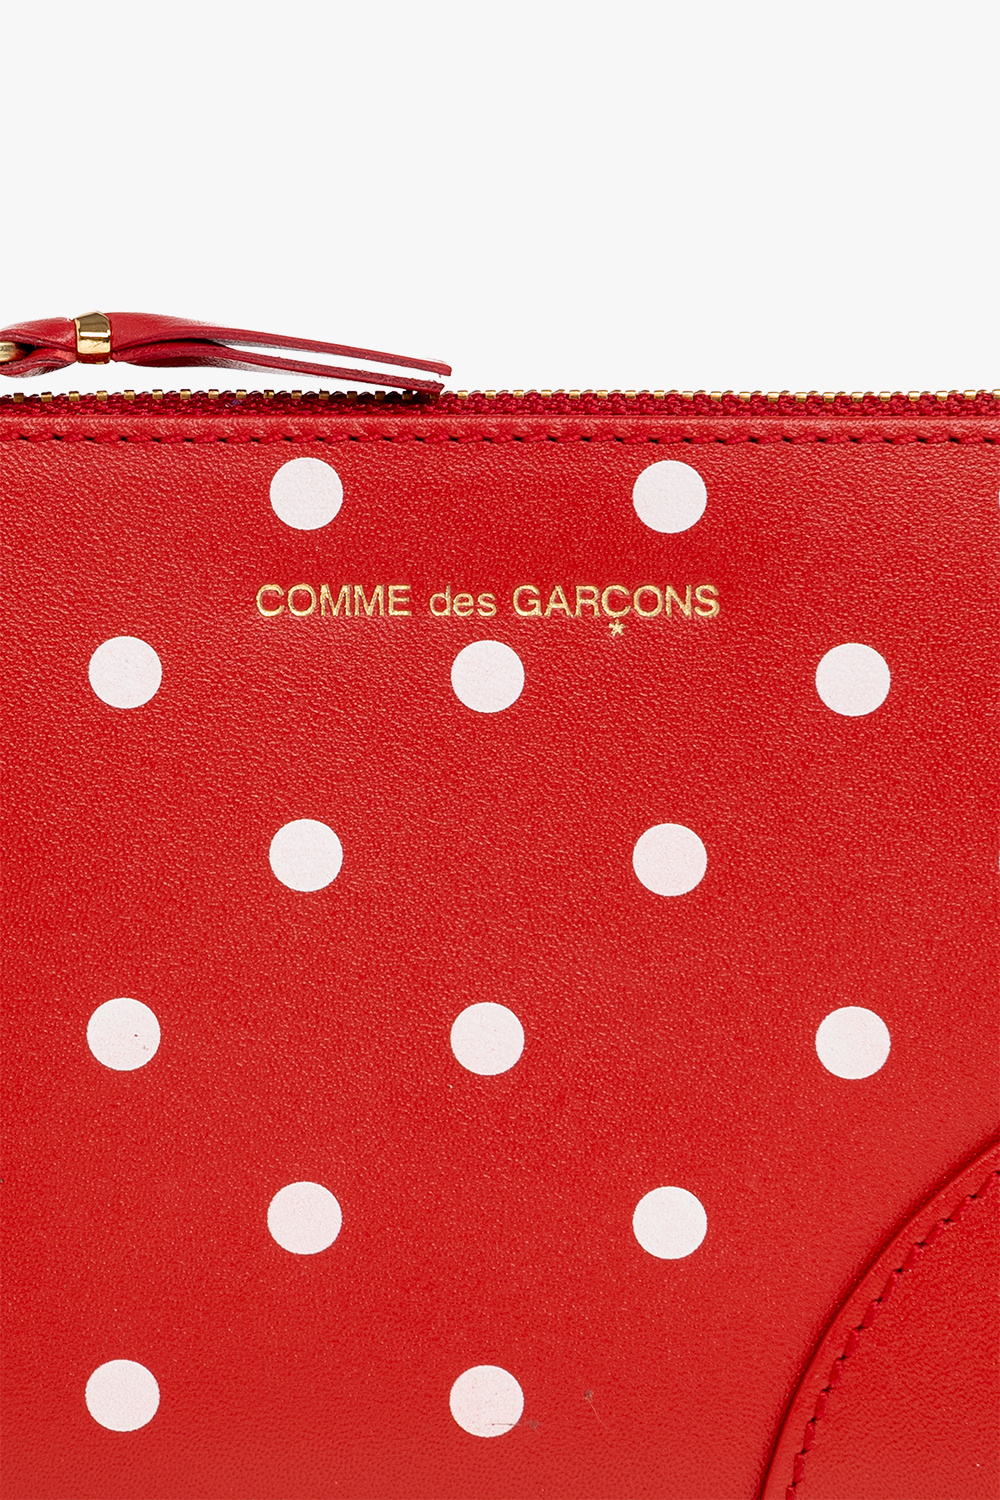 Comme des Garçons for the perfect Christmas tree gift